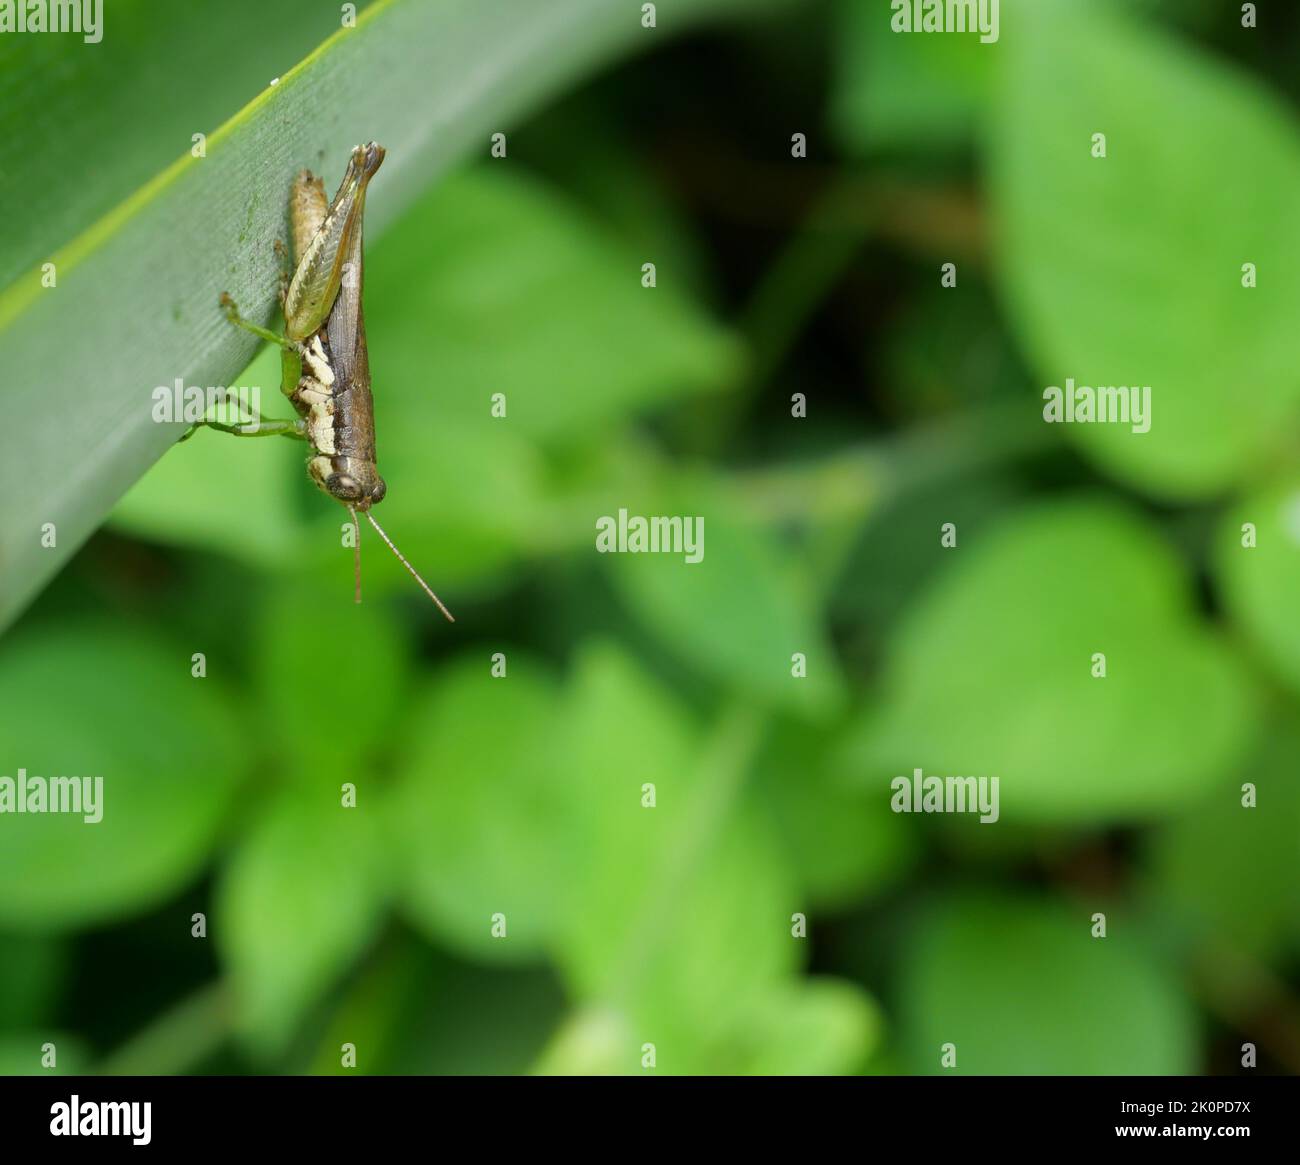 Grasshopper on tree leaf with natural green background, Black and green pattern of Insect pests in tropical areas Stock Photo